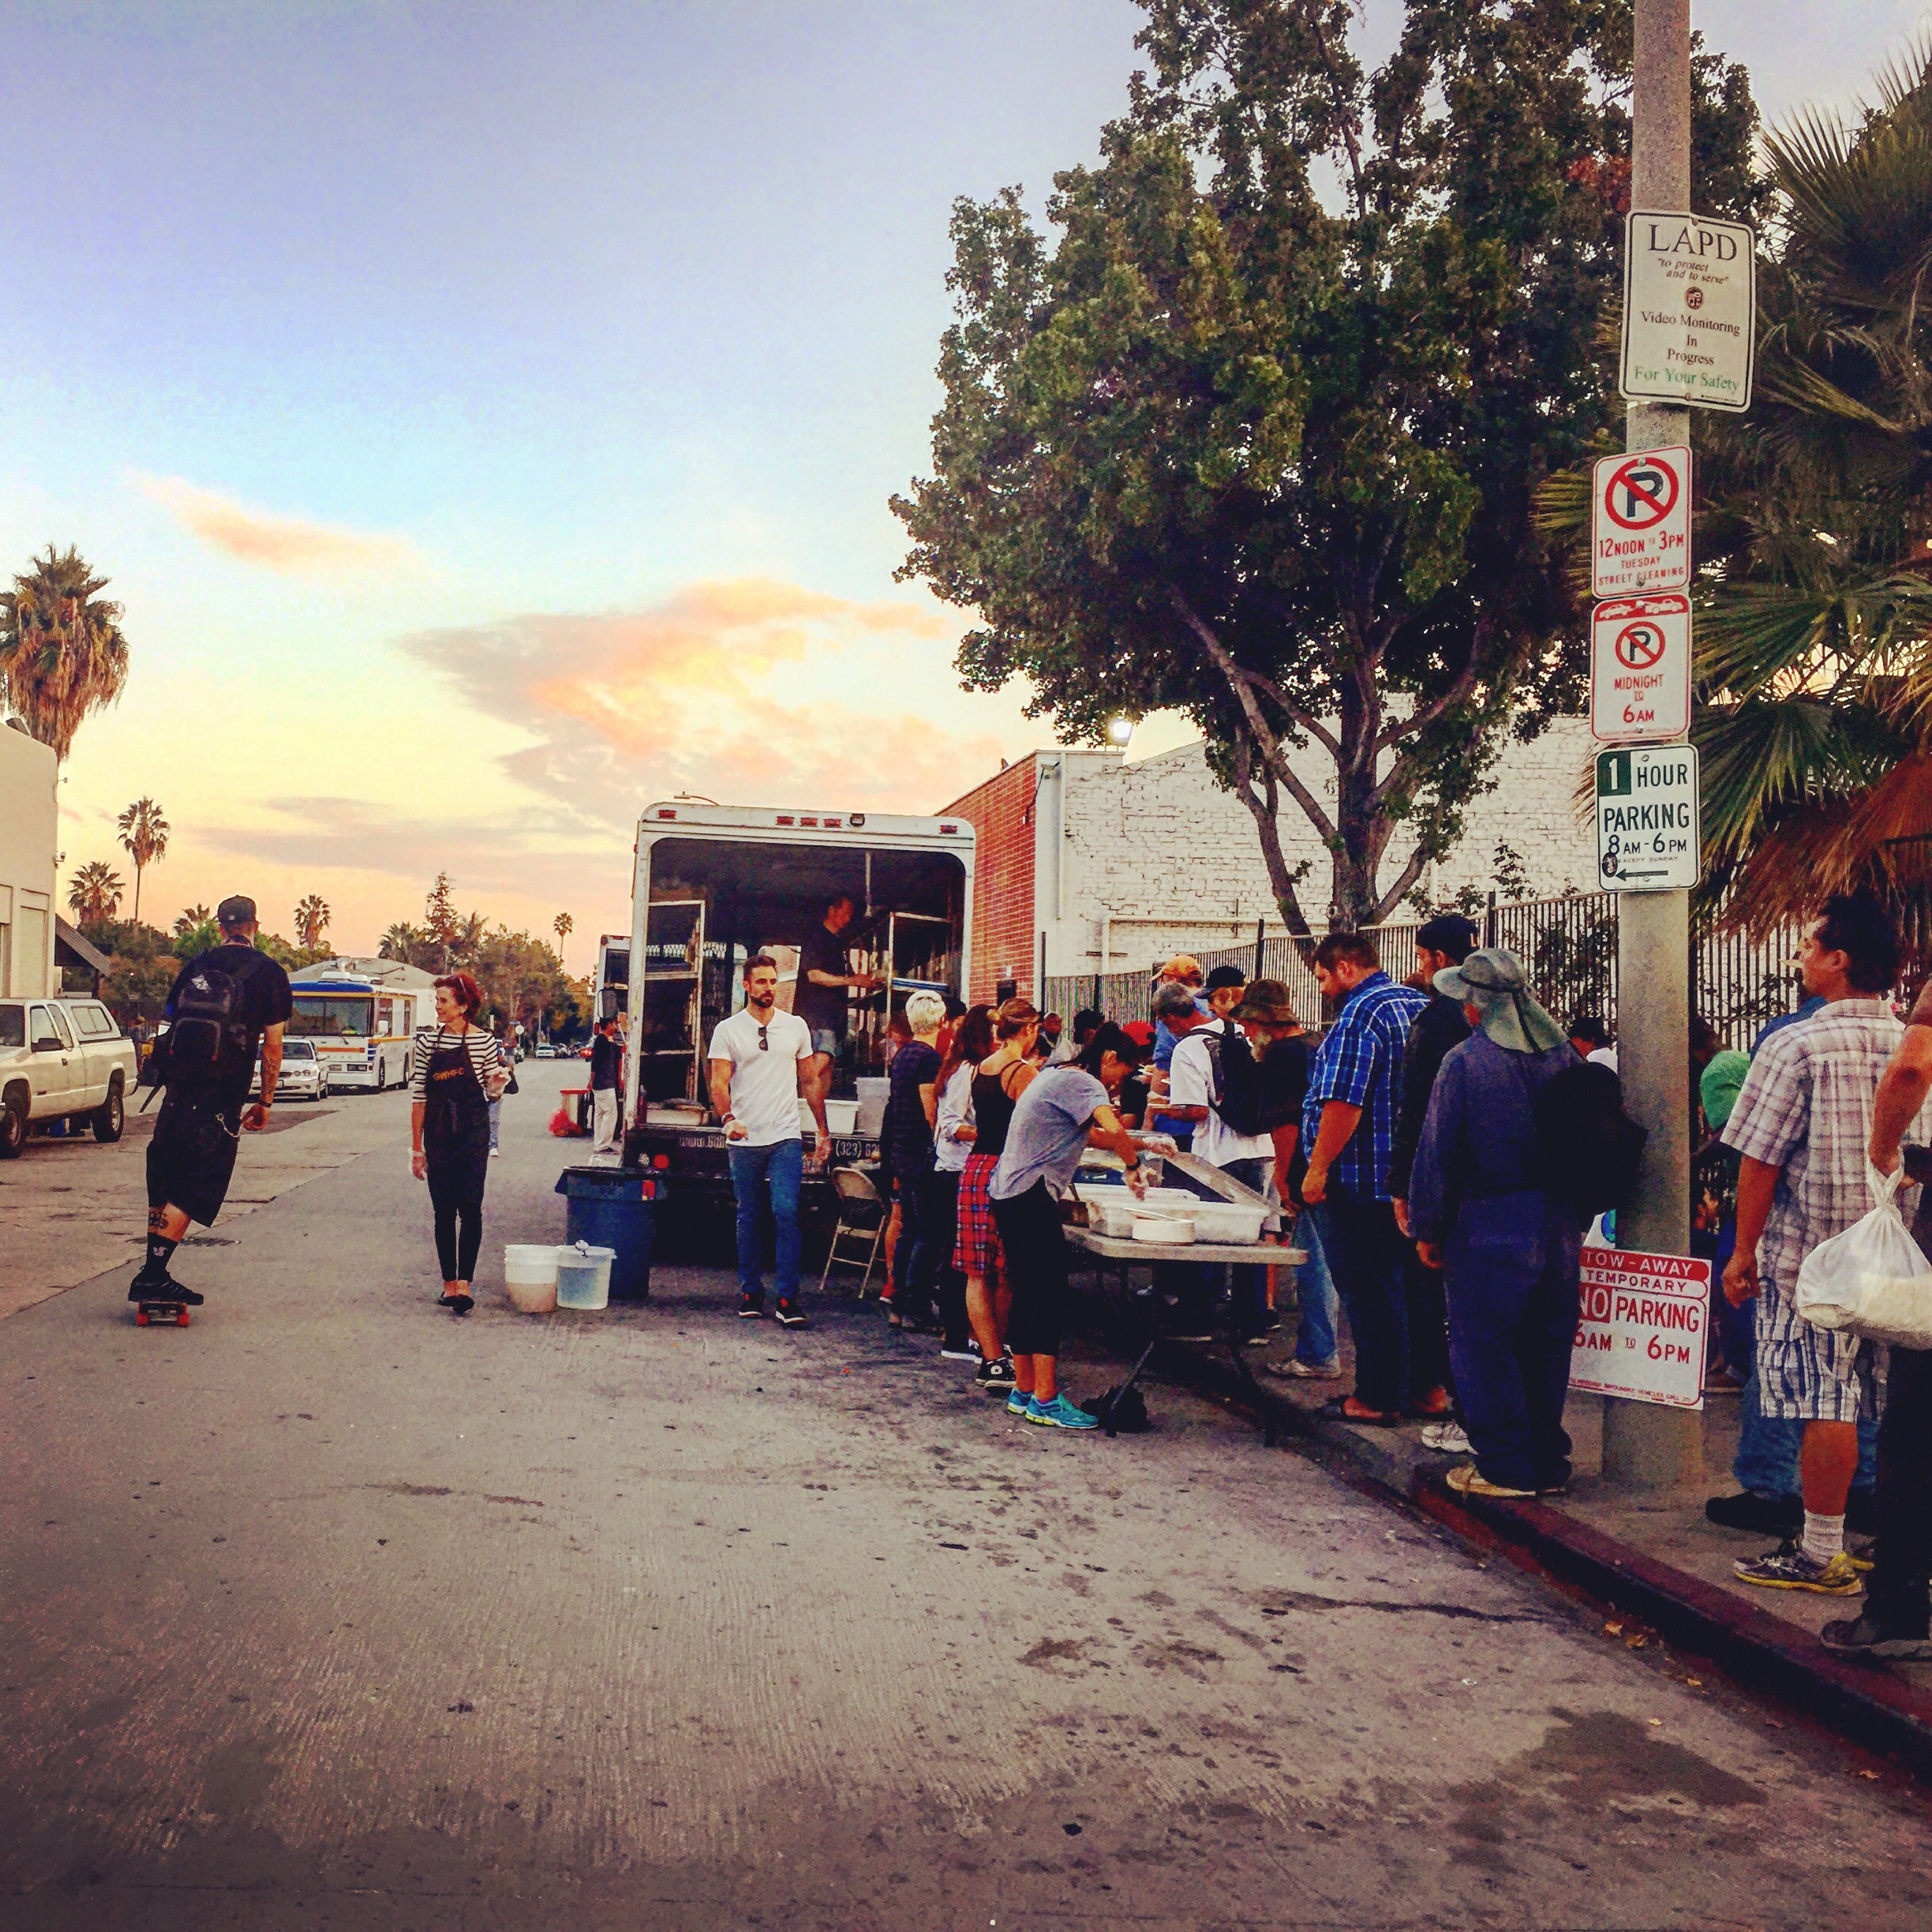 An LA sunset from the nightly food line